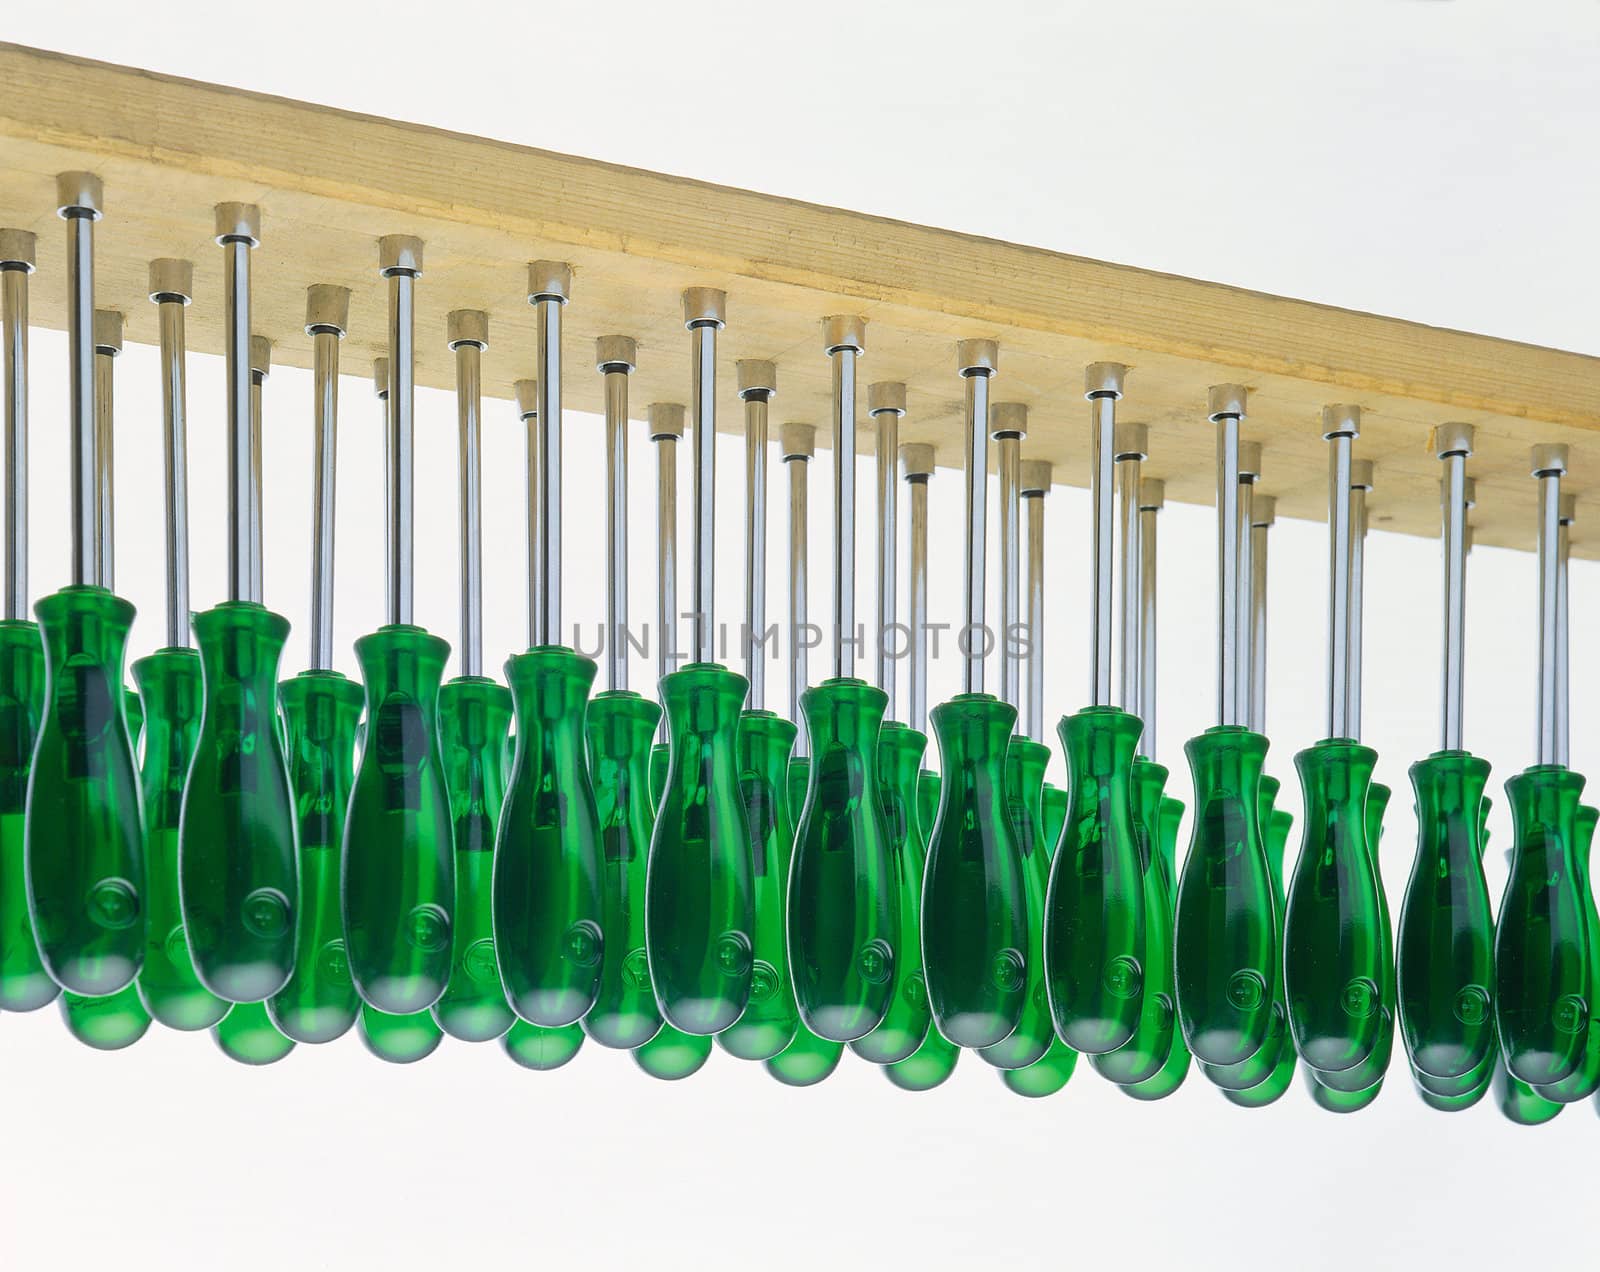 A large set of green screwdrivers in a row